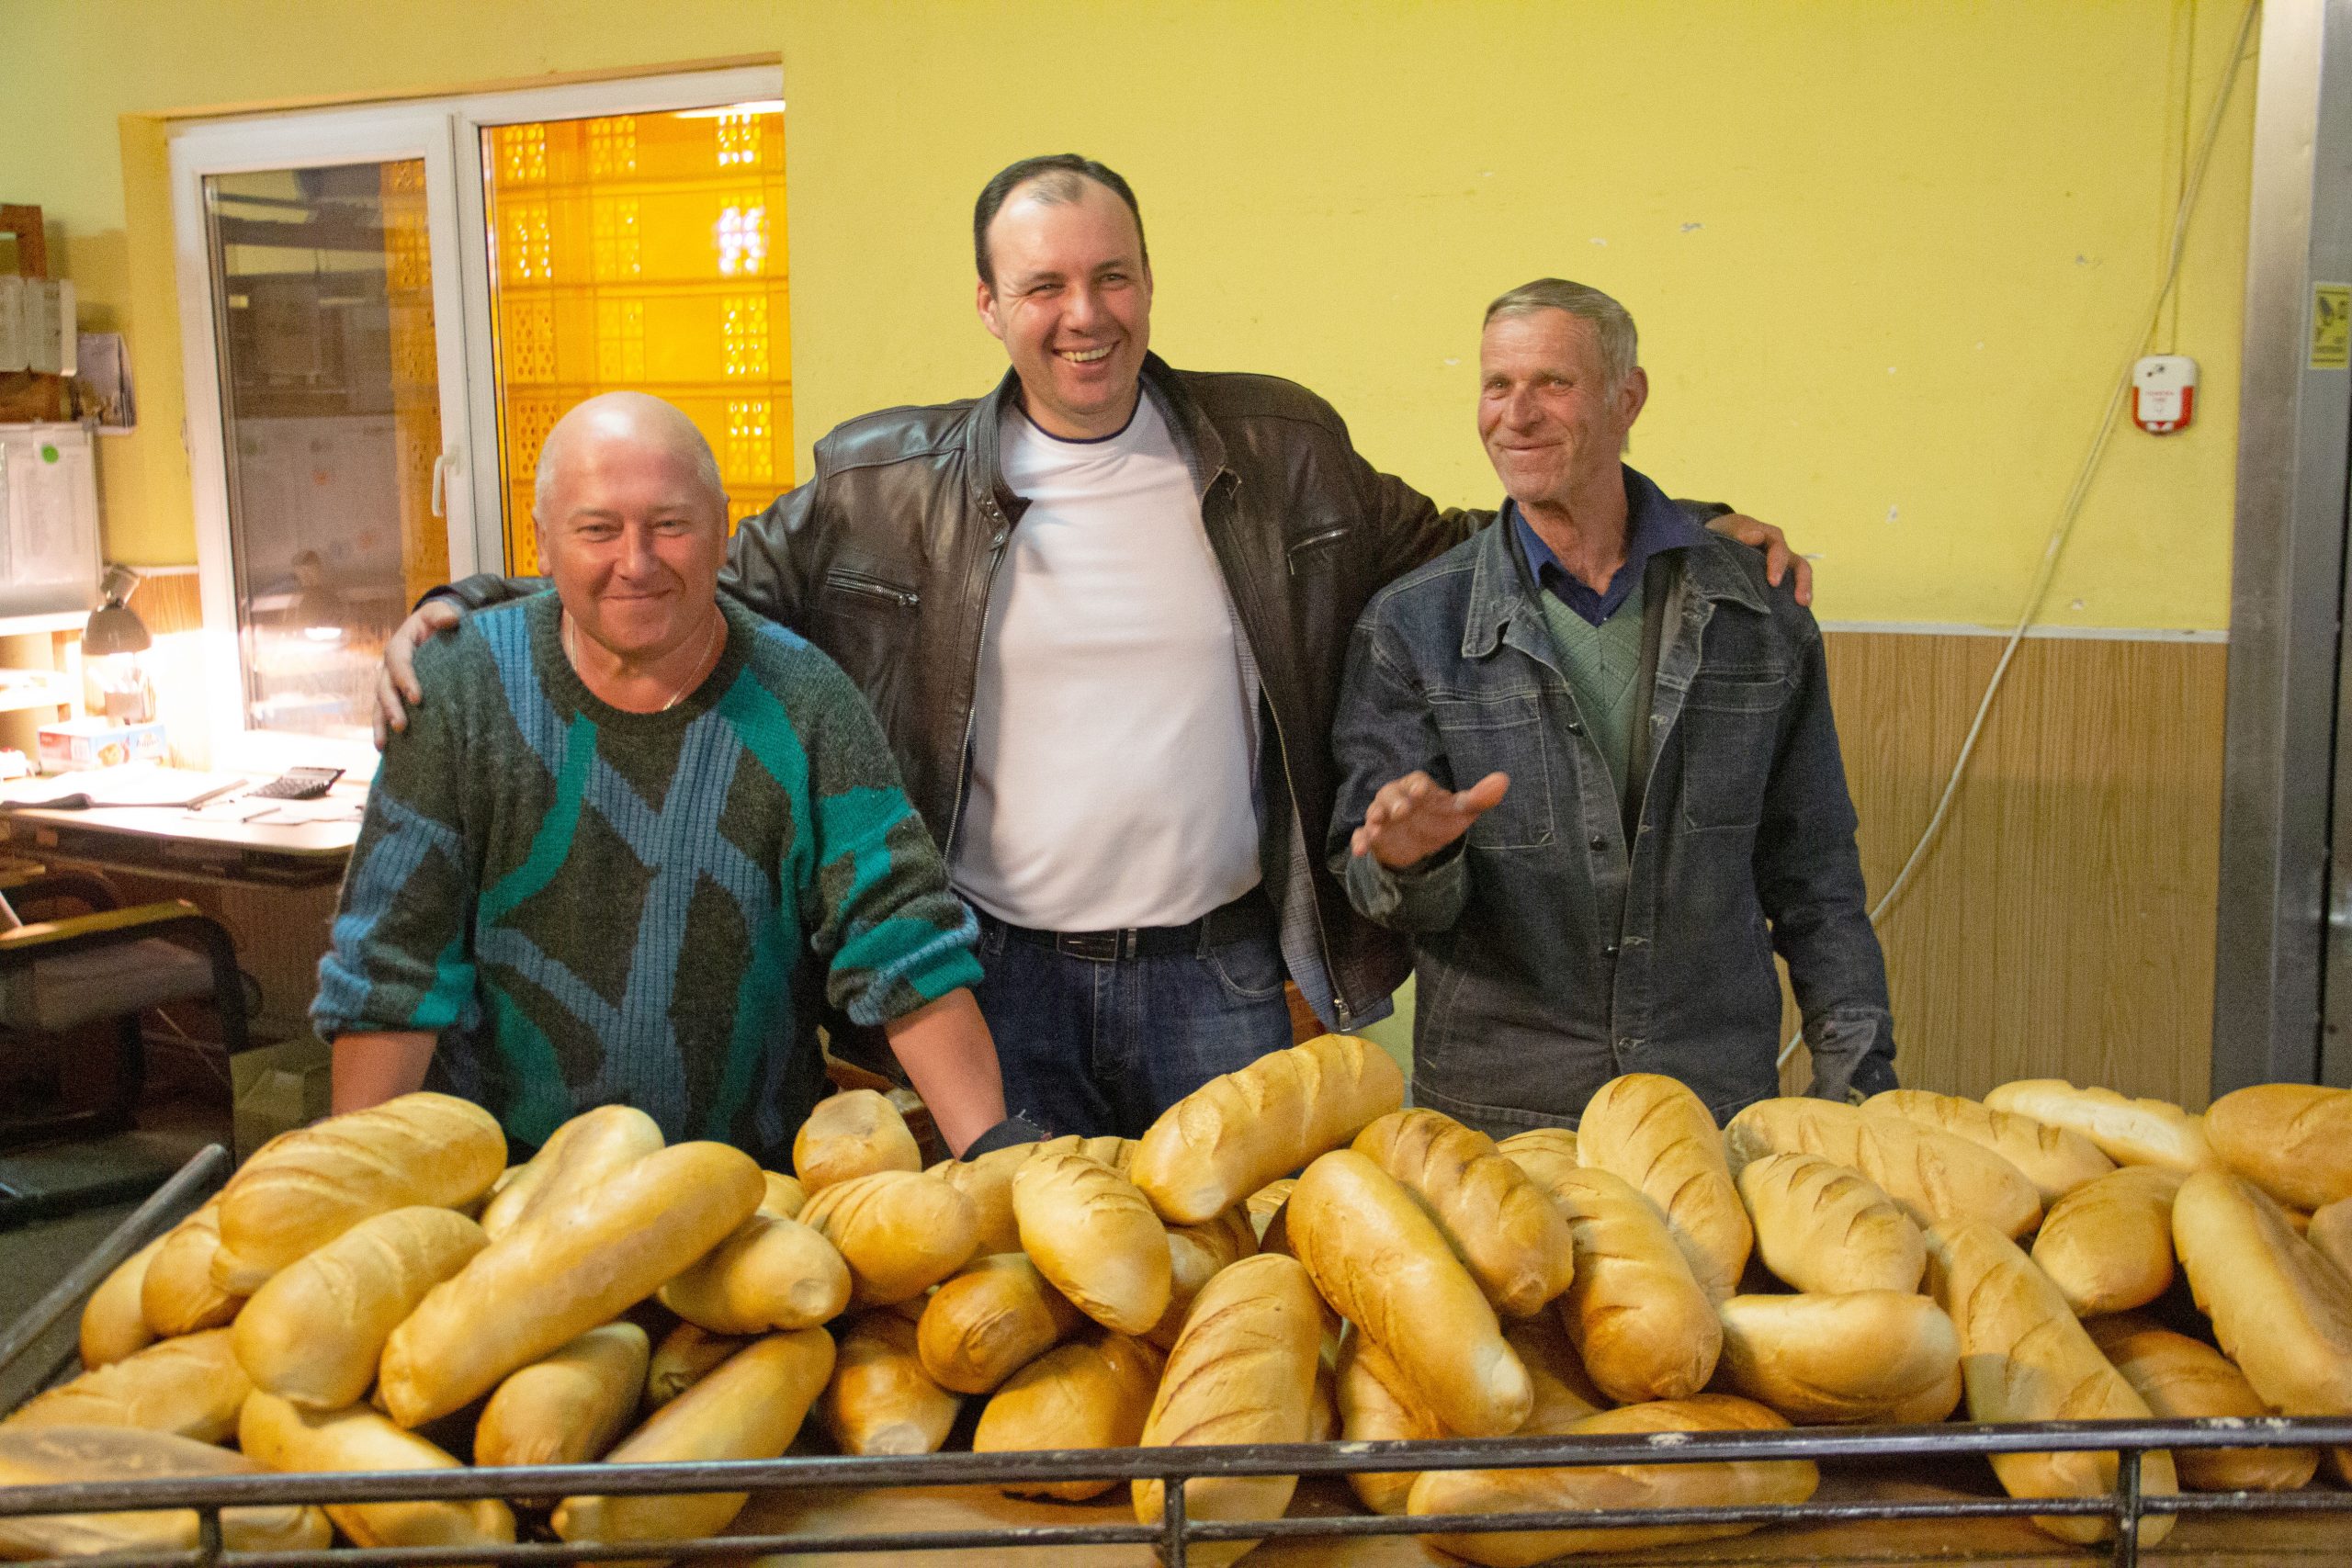 Three men smile in front of a table of bread.